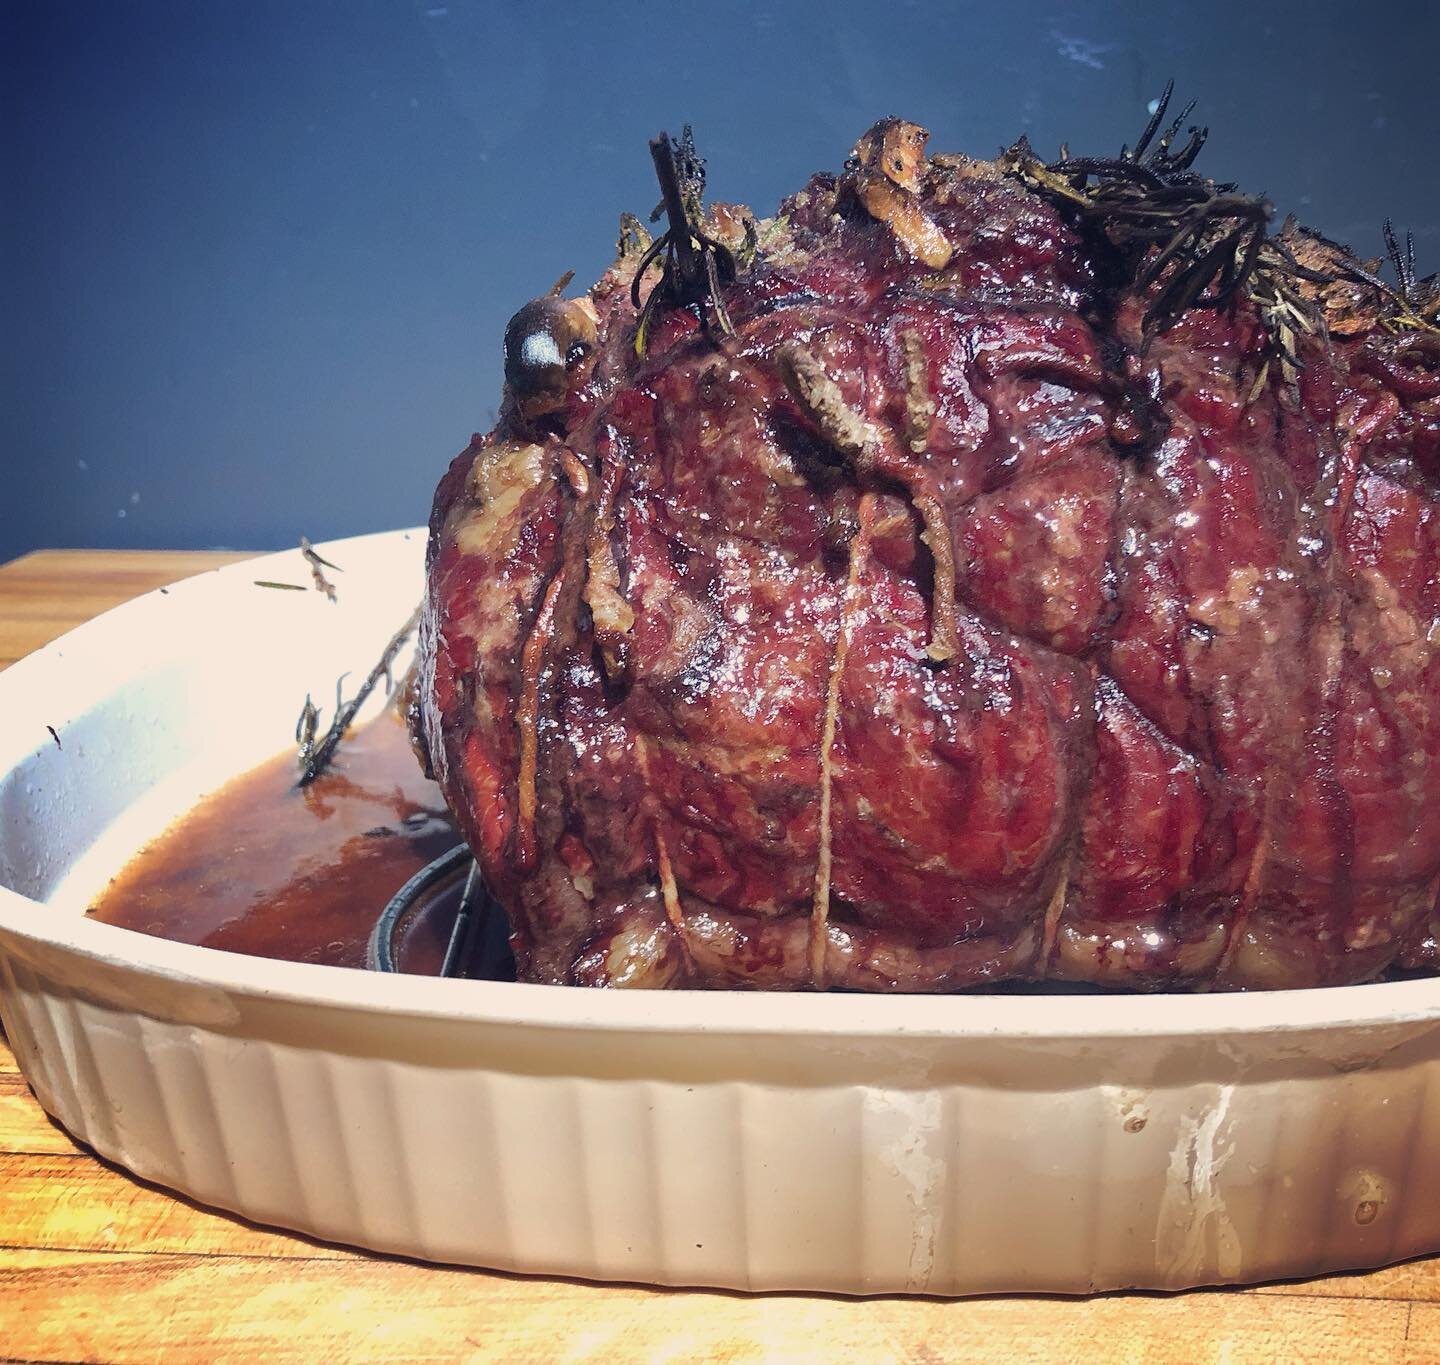 When your beef clients send you photos of what they do with your beef. Wowza! #merrychristmasfriendsandfamily